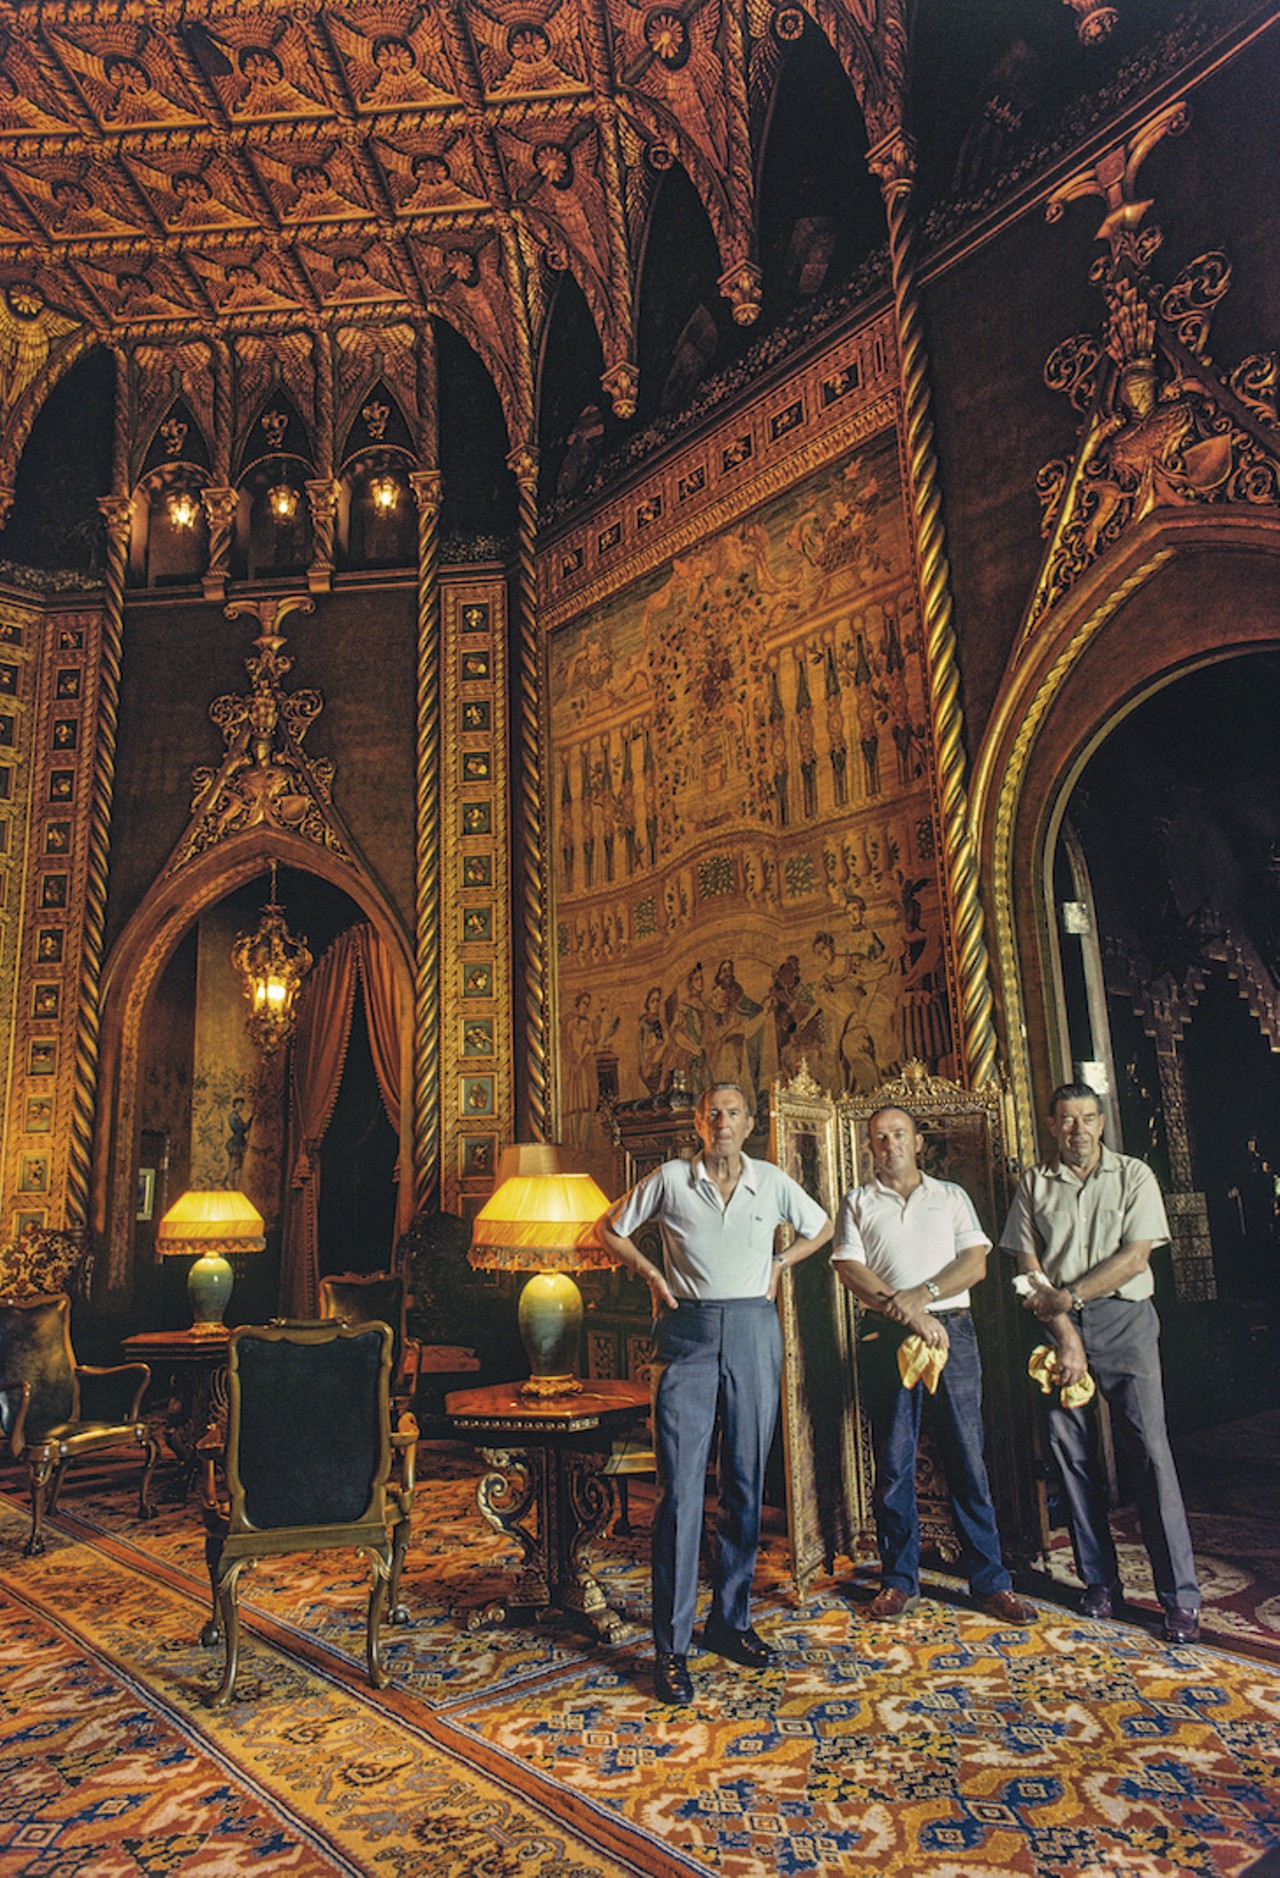 Caretakers in the opulent Hispano-Moresque style drawing room of Marjorie Merriweather Post in her residence at Mar-a-Lago, the fabulous winter villa in Palm Beach, Florida. Three members of her maintenance staff stand in the room, including Mr. Frank Moffat (standing left), responsible for household management as head steward or majordomo (on right). Mrs. Post died in 1973 and before it was sold to Donald Trump to create the Mar-a-Lago Club. The drawing room features antique furniture and tapestries and guilding on architectural features.